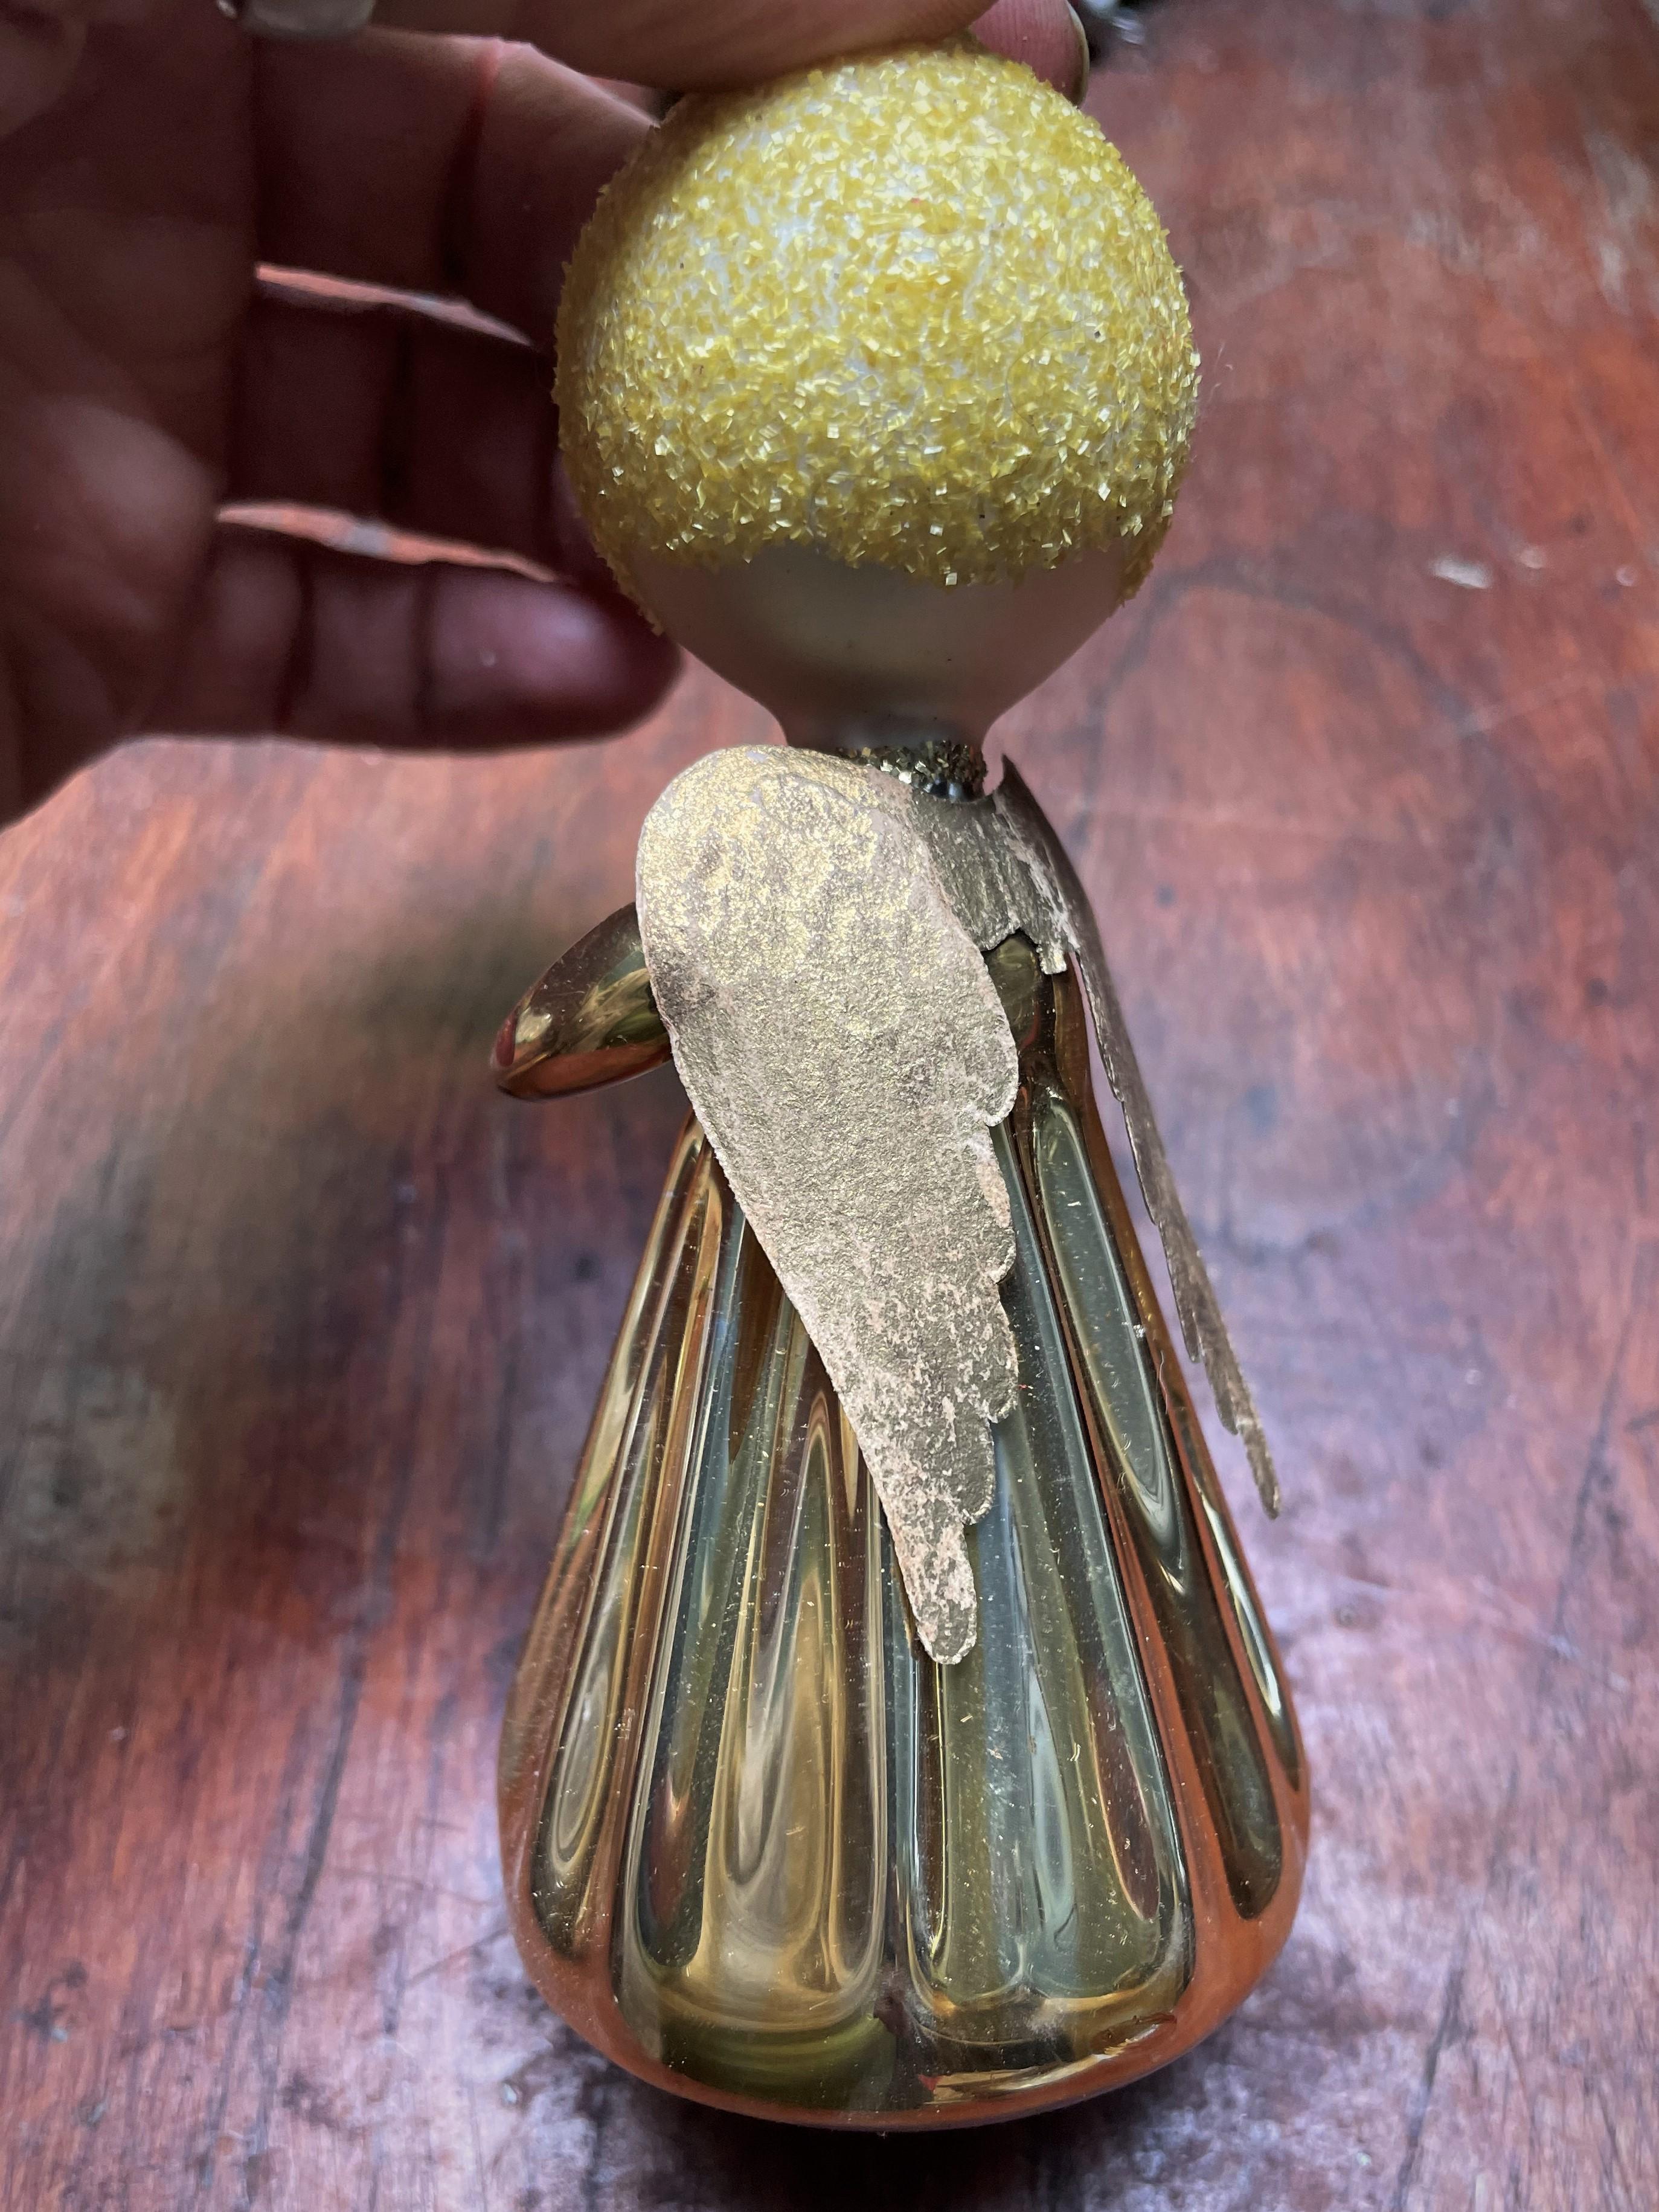 What an incredibly cute angel caroler Christmas ornament made from blown glass with textured yellow pieces glued to the head for hair and gold textured pieces glued down the front and around the neck as a choker. The wings are heavy paper coated